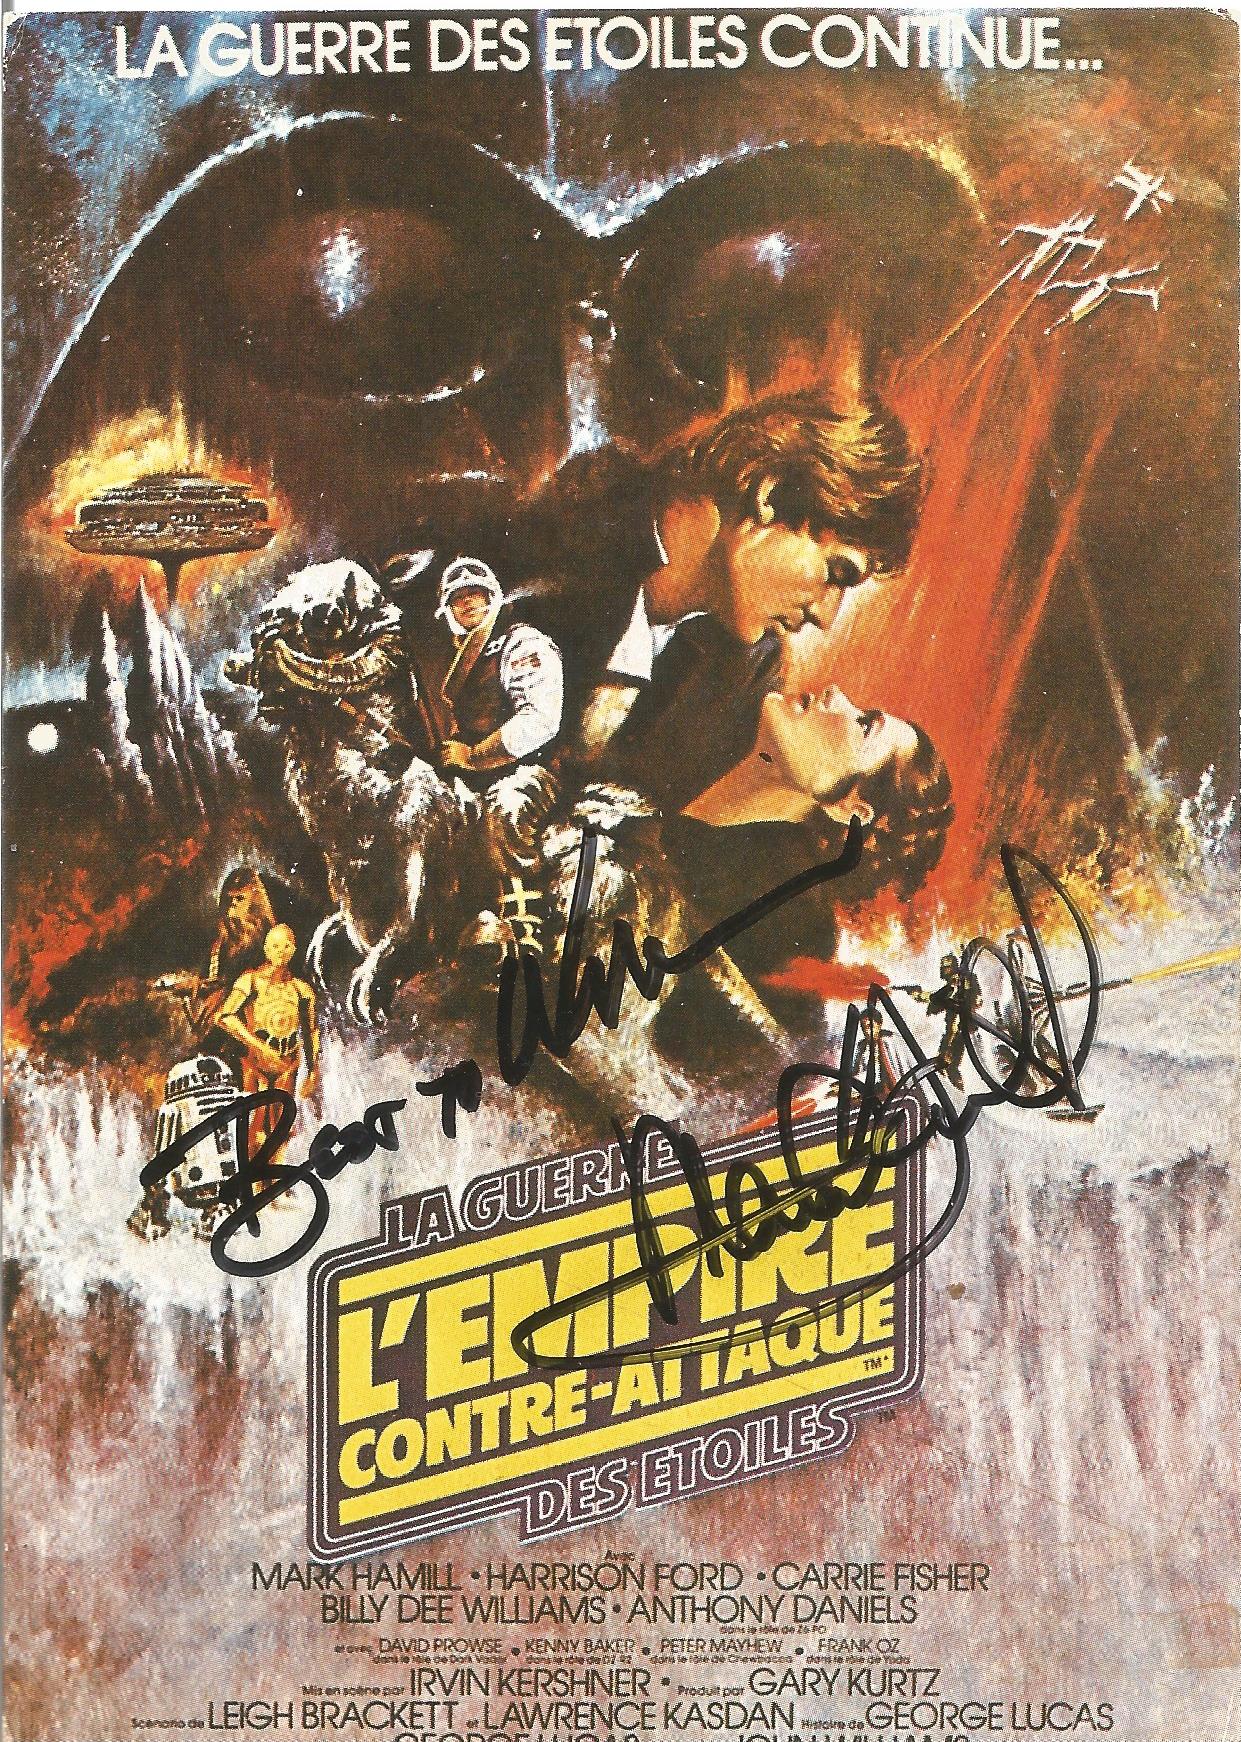 Mark Hamill signed 6x4 Star Wars colour French post card. Good Condition. All autographs come with a